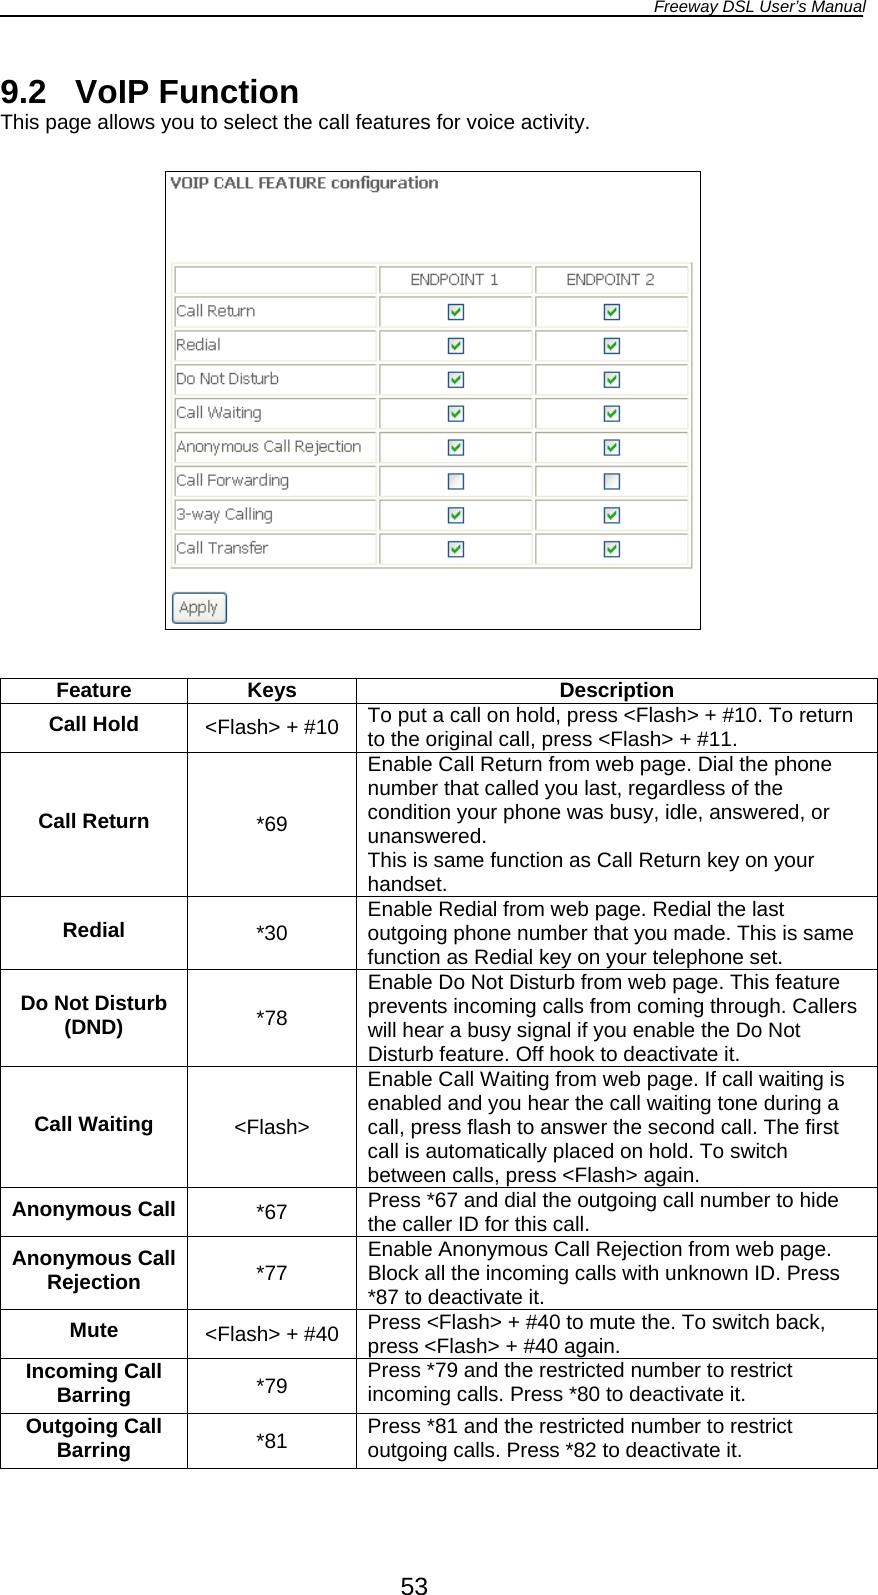 Freeway DSL User’s Manual  53 9.2 VoIP Function This page allows you to select the call features for voice activity.     Feature Keys  Description Call Hold  &lt;Flash&gt; + #10 To put a call on hold, press &lt;Flash&gt; + #10. To return to the original call, press &lt;Flash&gt; + #11. Call Return  *69 Enable Call Return from web page. Dial the phone number that called you last, regardless of the condition your phone was busy, idle, answered, or unanswered. This is same function as Call Return key on your handset. Redial  *30  Enable Redial from web page. Redial the last outgoing phone number that you made. This is same function as Redial key on your telephone set. Do Not Disturb (DND)  *78 Enable Do Not Disturb from web page. This feature prevents incoming calls from coming through. Callers will hear a busy signal if you enable the Do Not Disturb feature. Off hook to deactivate it. Call Waiting  &lt;Flash&gt; Enable Call Waiting from web page. If call waiting is enabled and you hear the call waiting tone during a call, press flash to answer the second call. The first call is automatically placed on hold. To switch between calls, press &lt;Flash&gt; again. Anonymous Call  *67  Press *67 and dial the outgoing call number to hide the caller ID for this call. Anonymous Call Rejection  *77  Enable Anonymous Call Rejection from web page. Block all the incoming calls with unknown ID. Press *87 to deactivate it. Mute  &lt;Flash&gt; + #40 Press &lt;Flash&gt; + #40 to mute the. To switch back, press &lt;Flash&gt; + #40 again. Incoming Call Barring  *79  Press *79 and the restricted number to restrict incoming calls. Press *80 to deactivate it. Outgoing Call Barring  *81  Press *81 and the restricted number to restrict outgoing calls. Press *82 to deactivate it. 